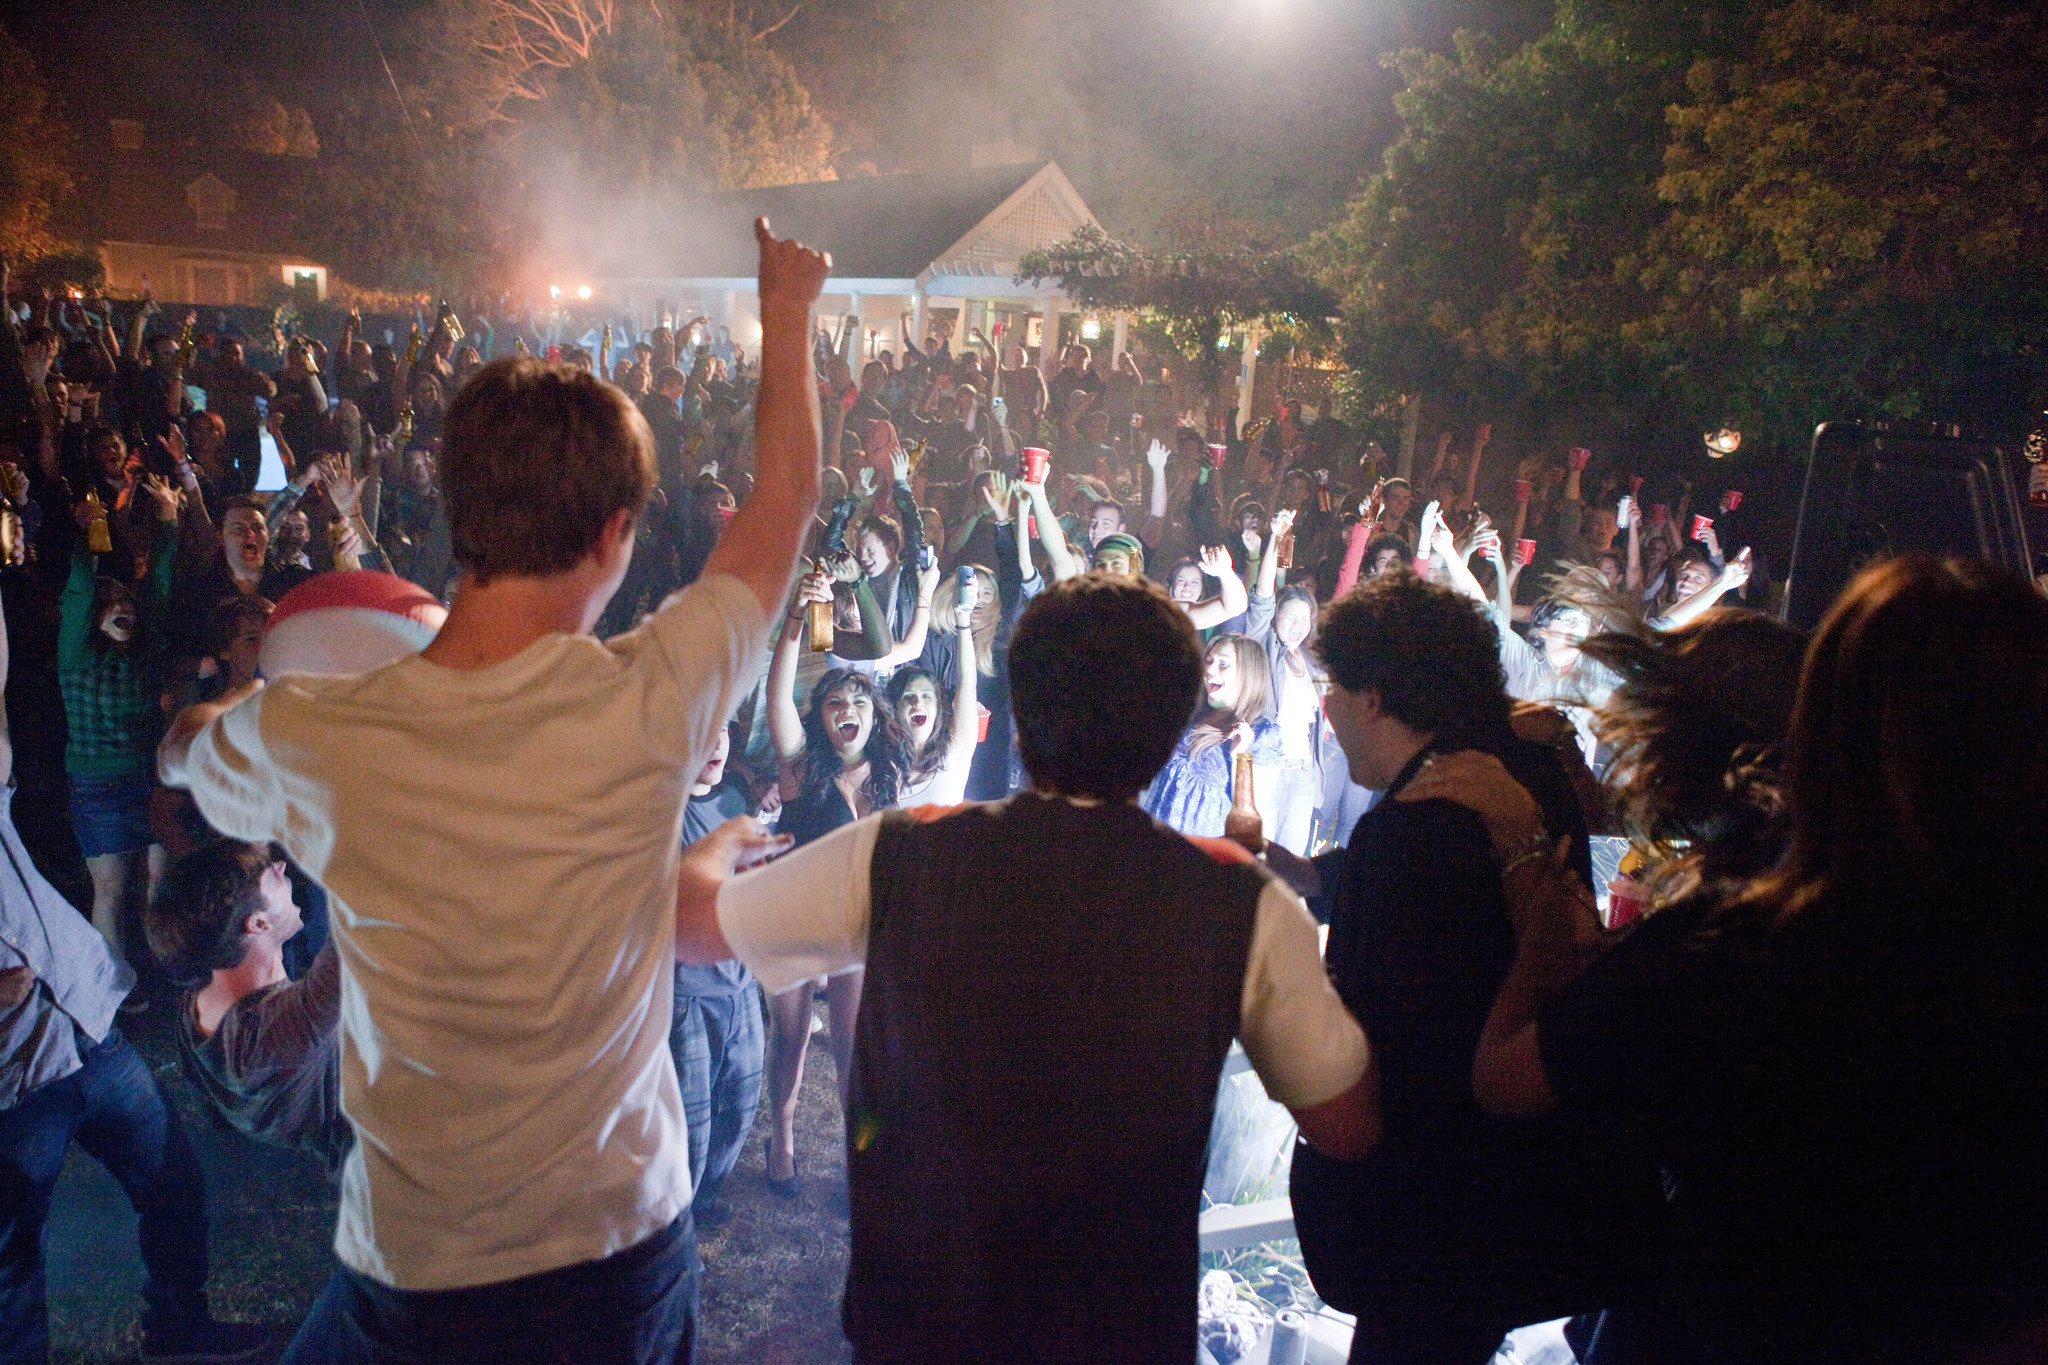 Project X Wallpapers